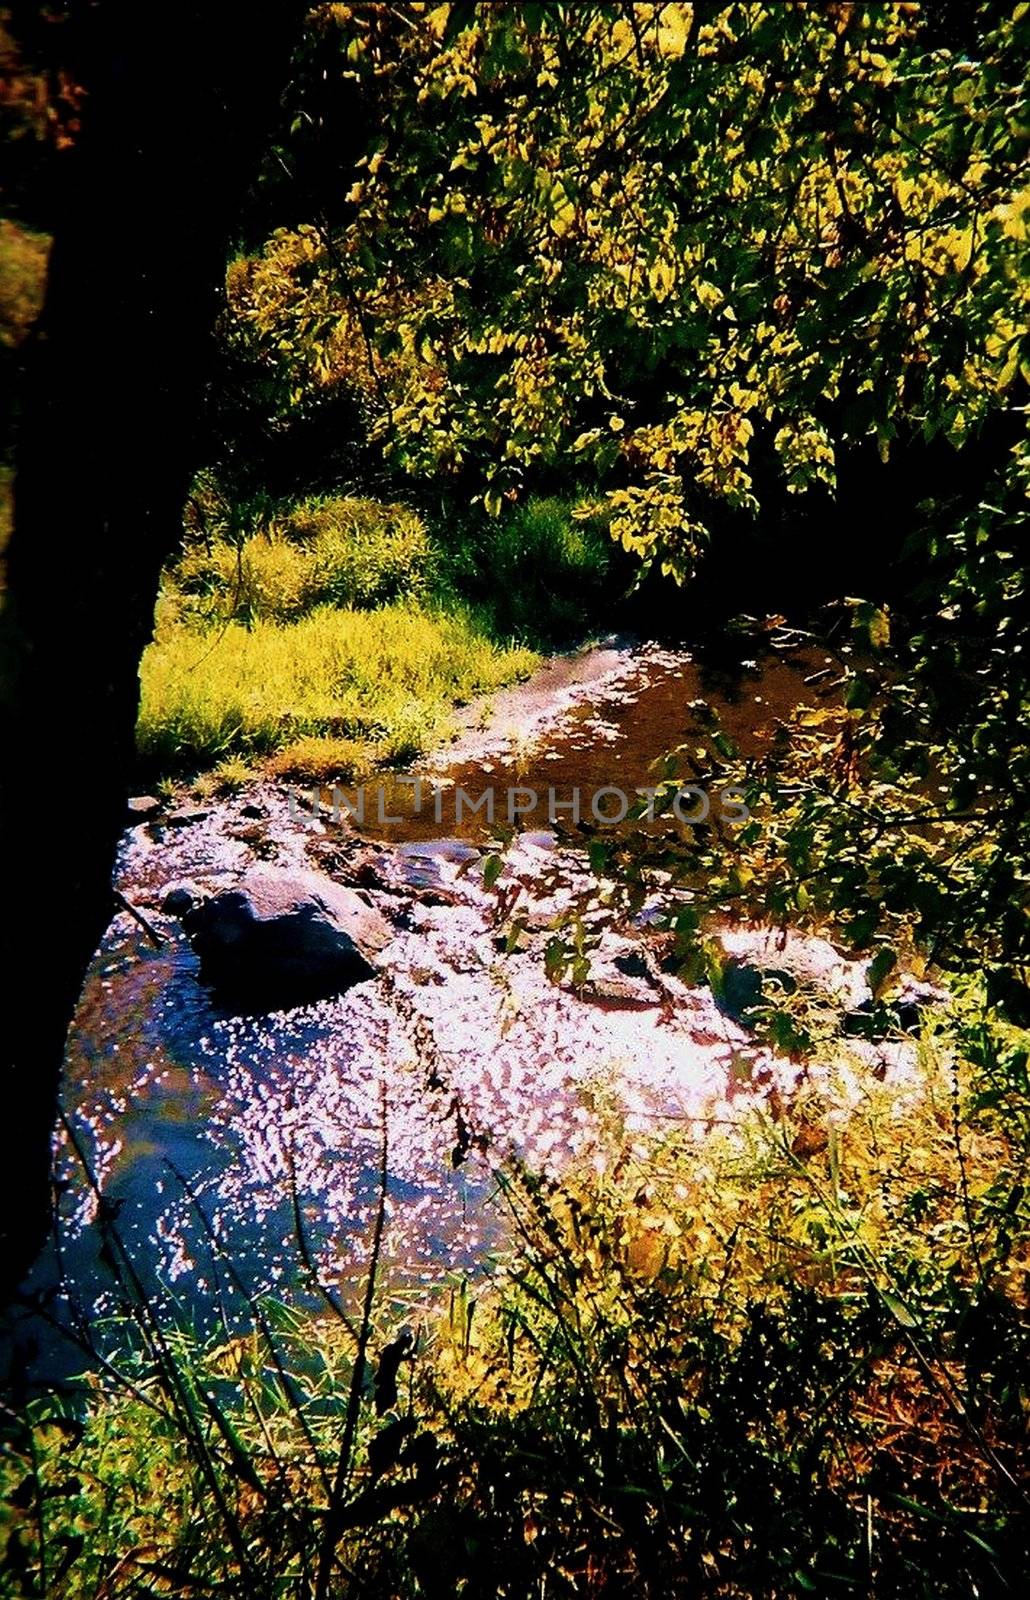 A small river under tree cover.